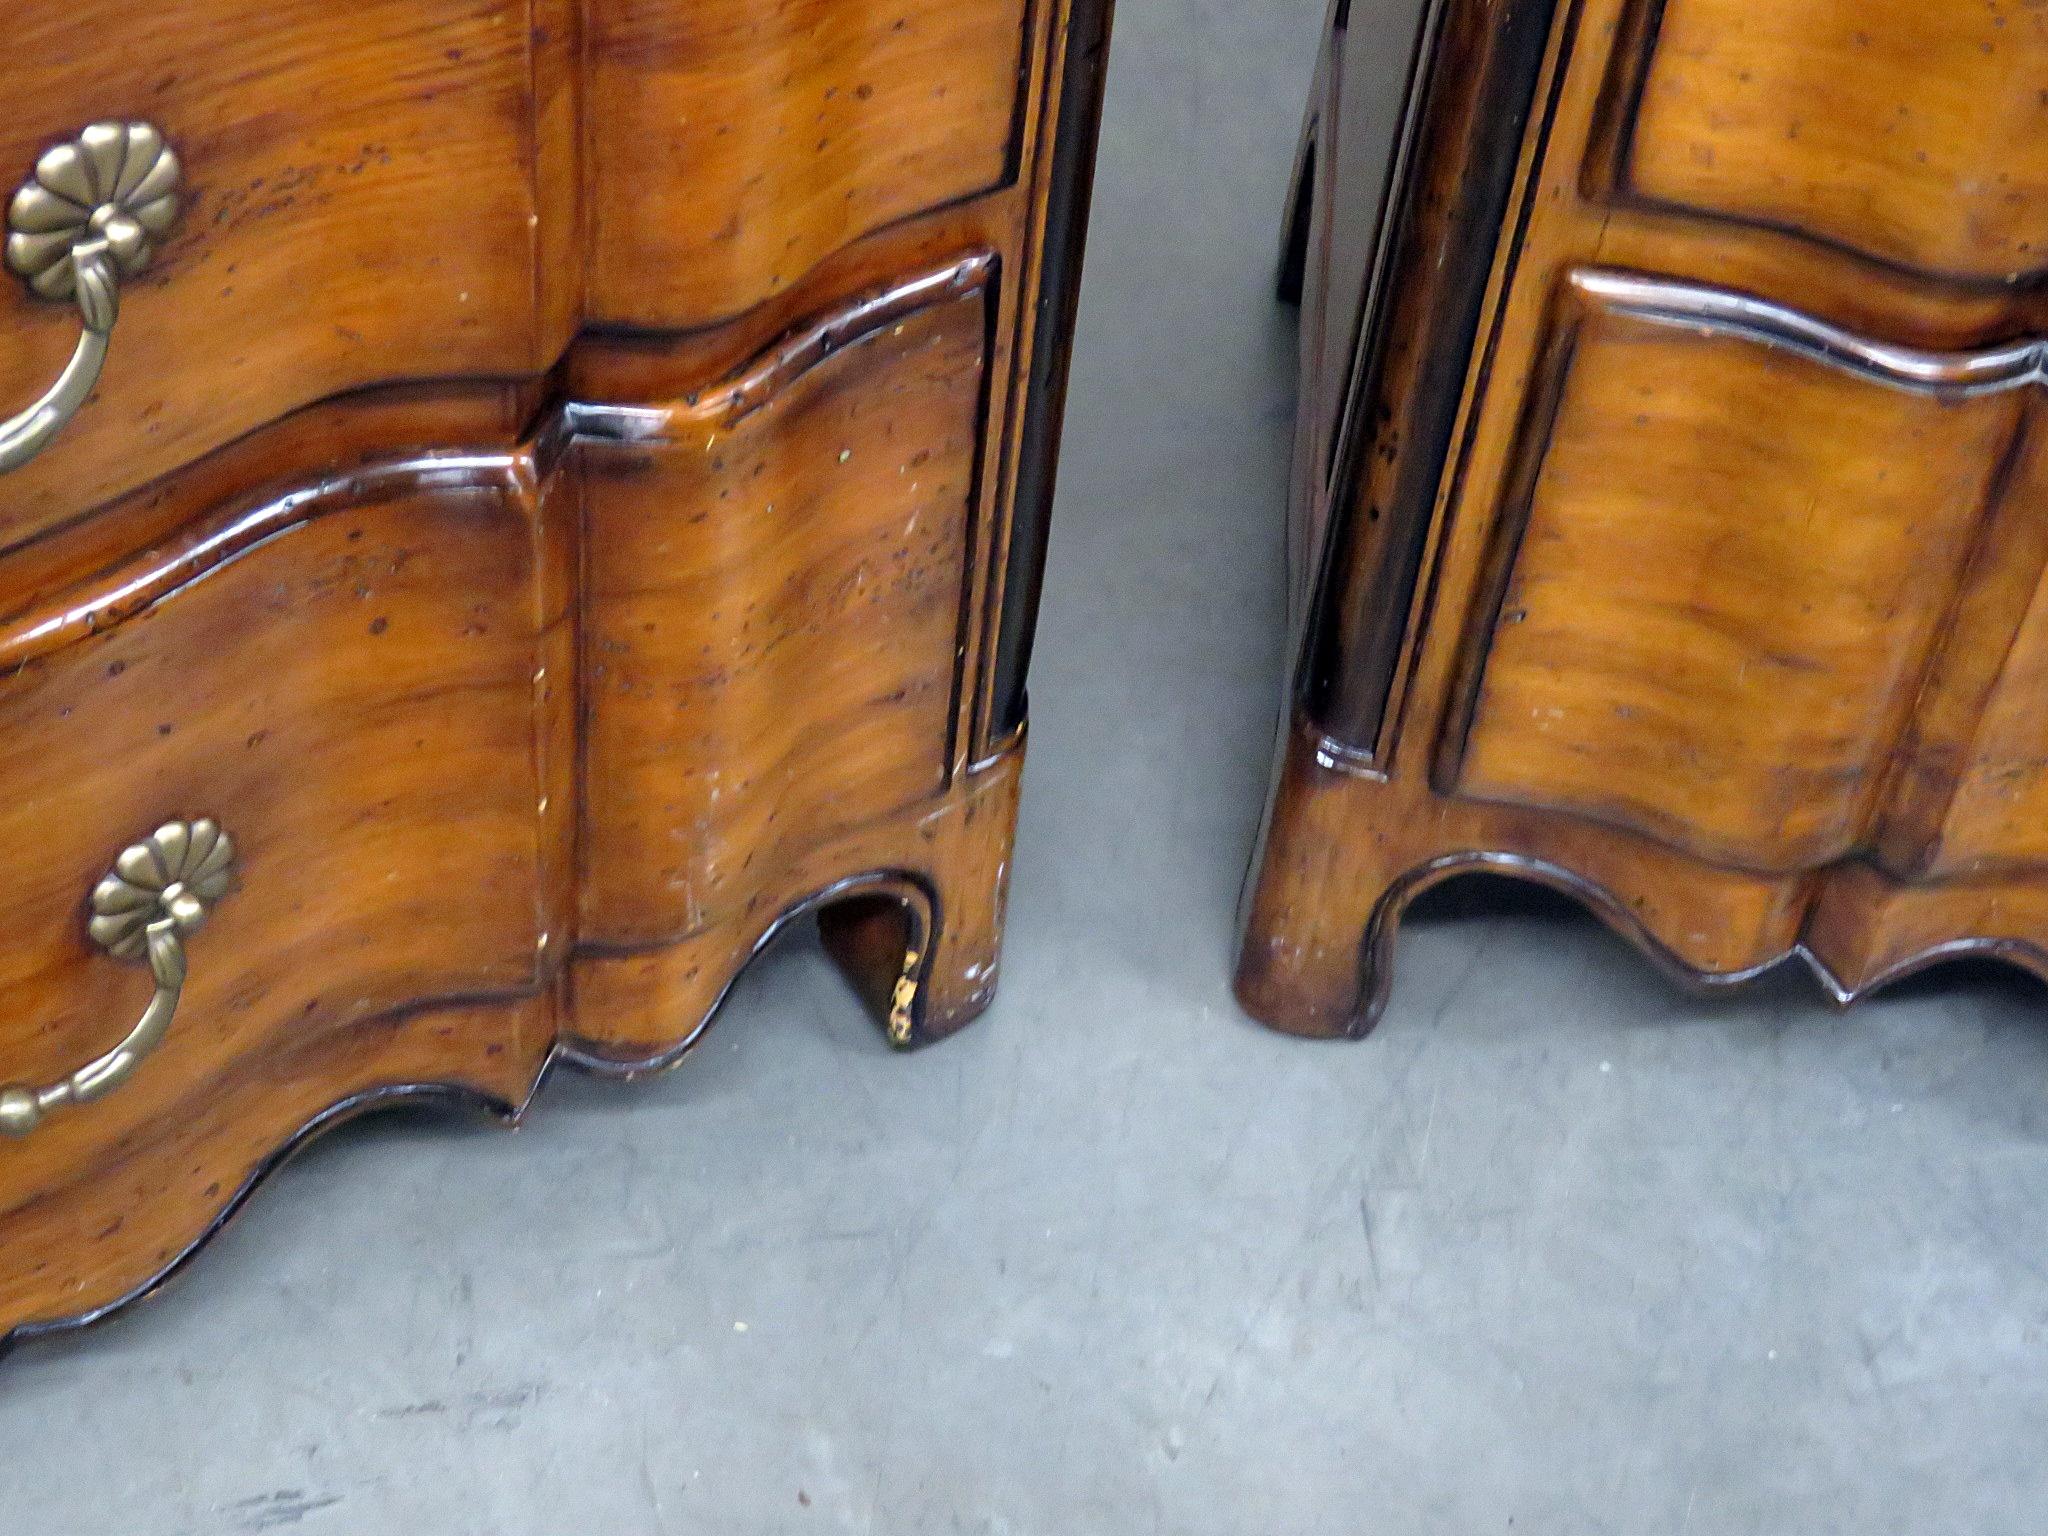 Pair of Theodore Alexander Chateau Du Vallois 3 drawer commodes or night stands with a distressed finish.